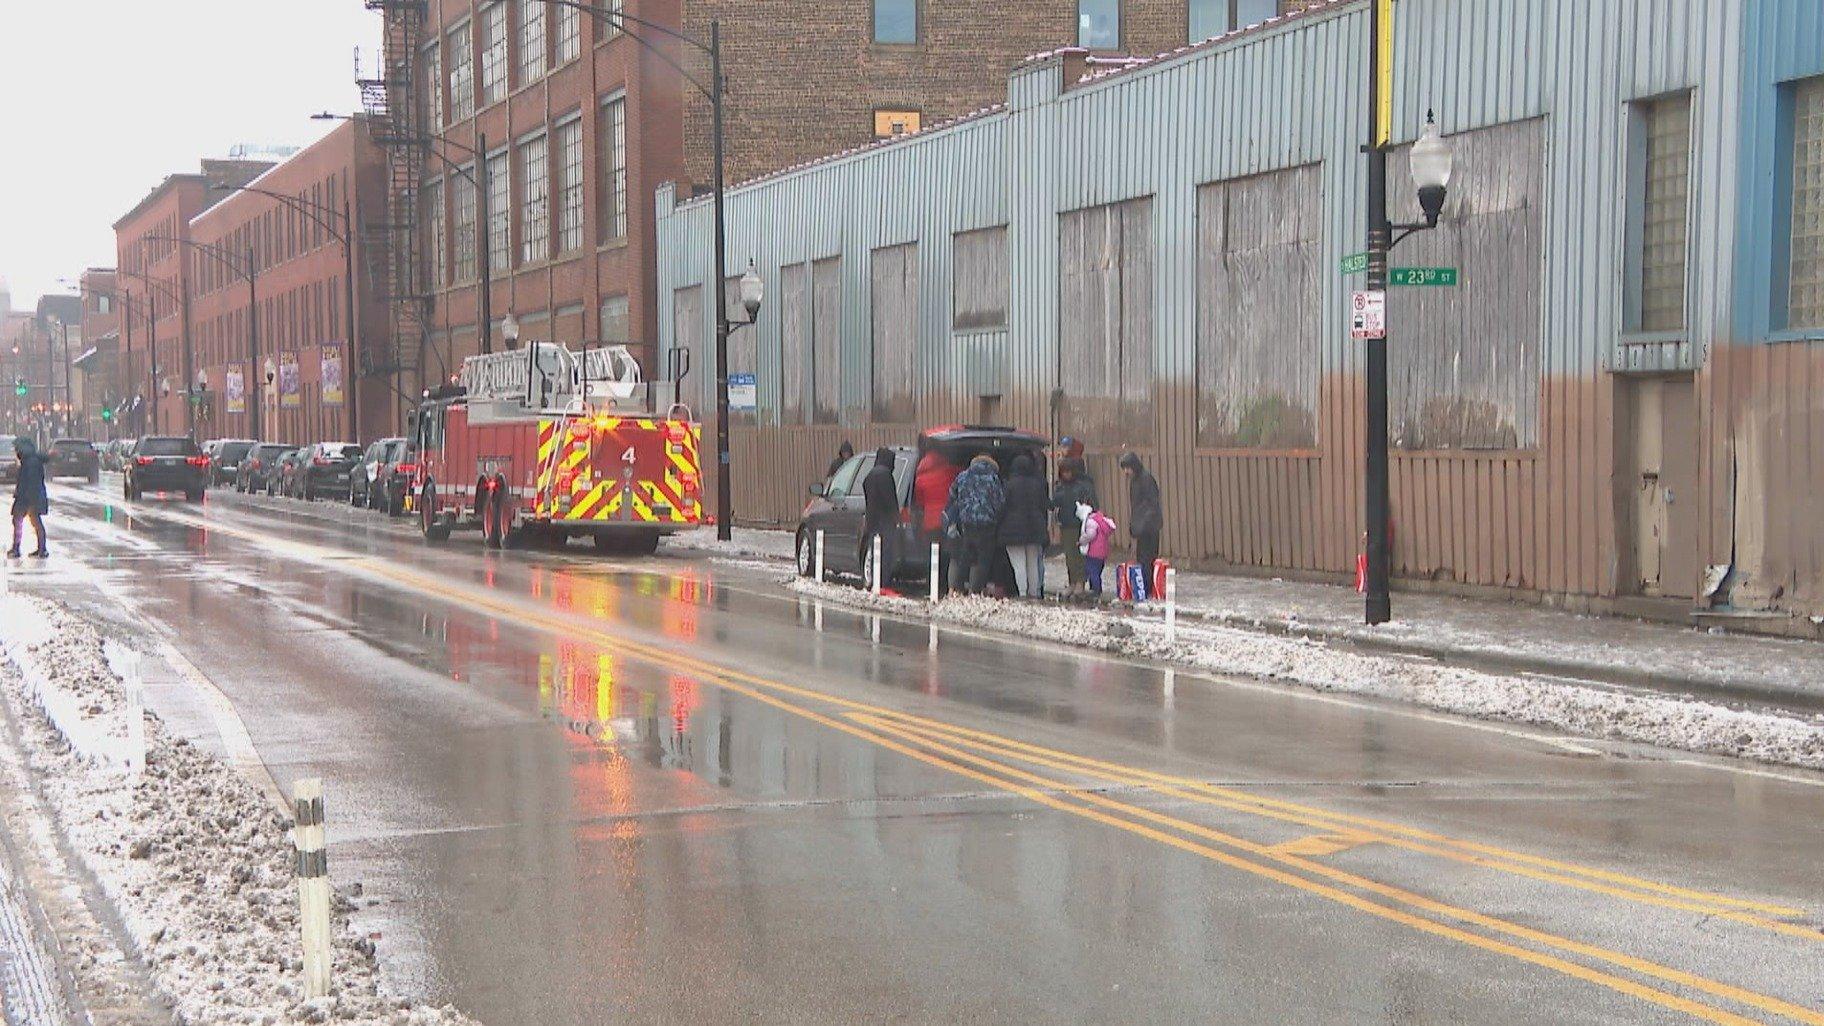 The former industrial building at 2241 S. Halsted St. that has been converted into the city's largest shelter. (WTTW News)